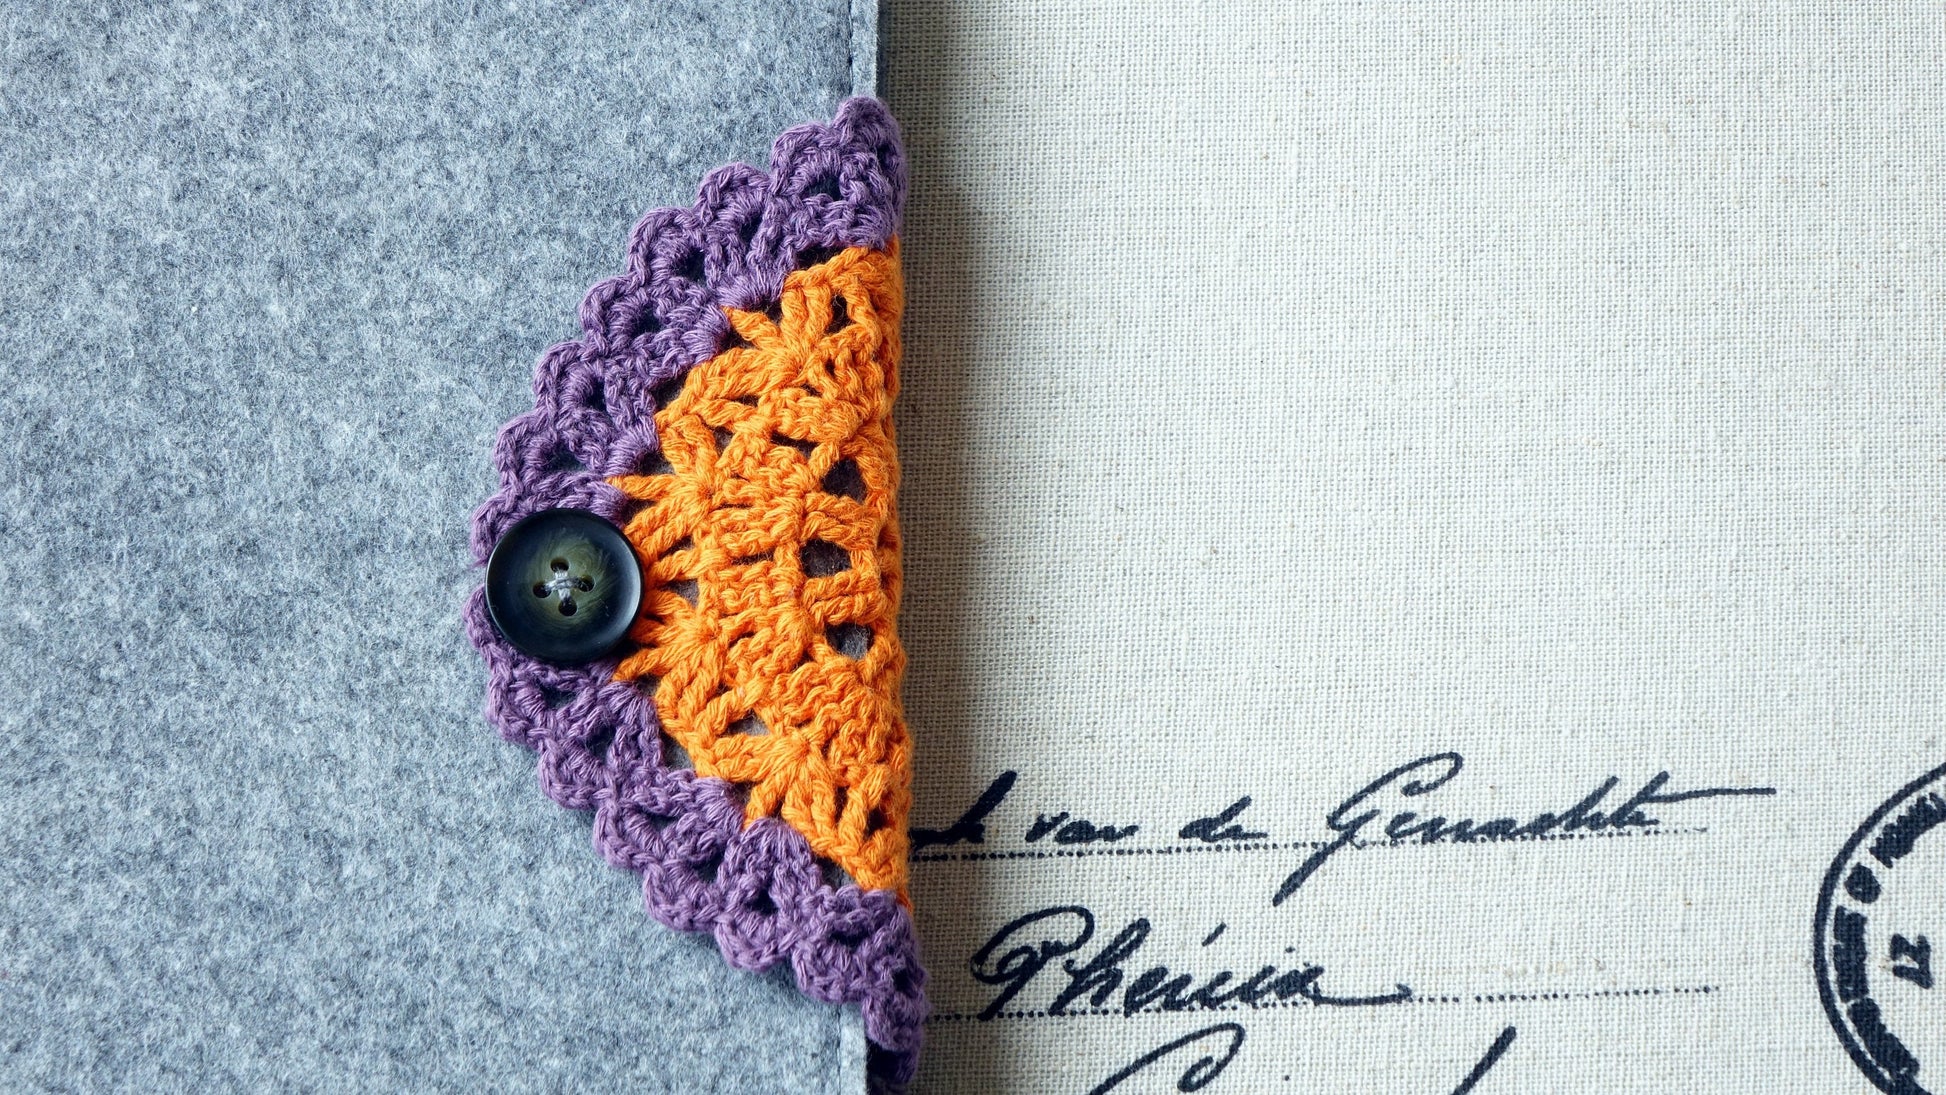 Notebook with Felt Cover and Crochet Detail - Verna Artisan Works